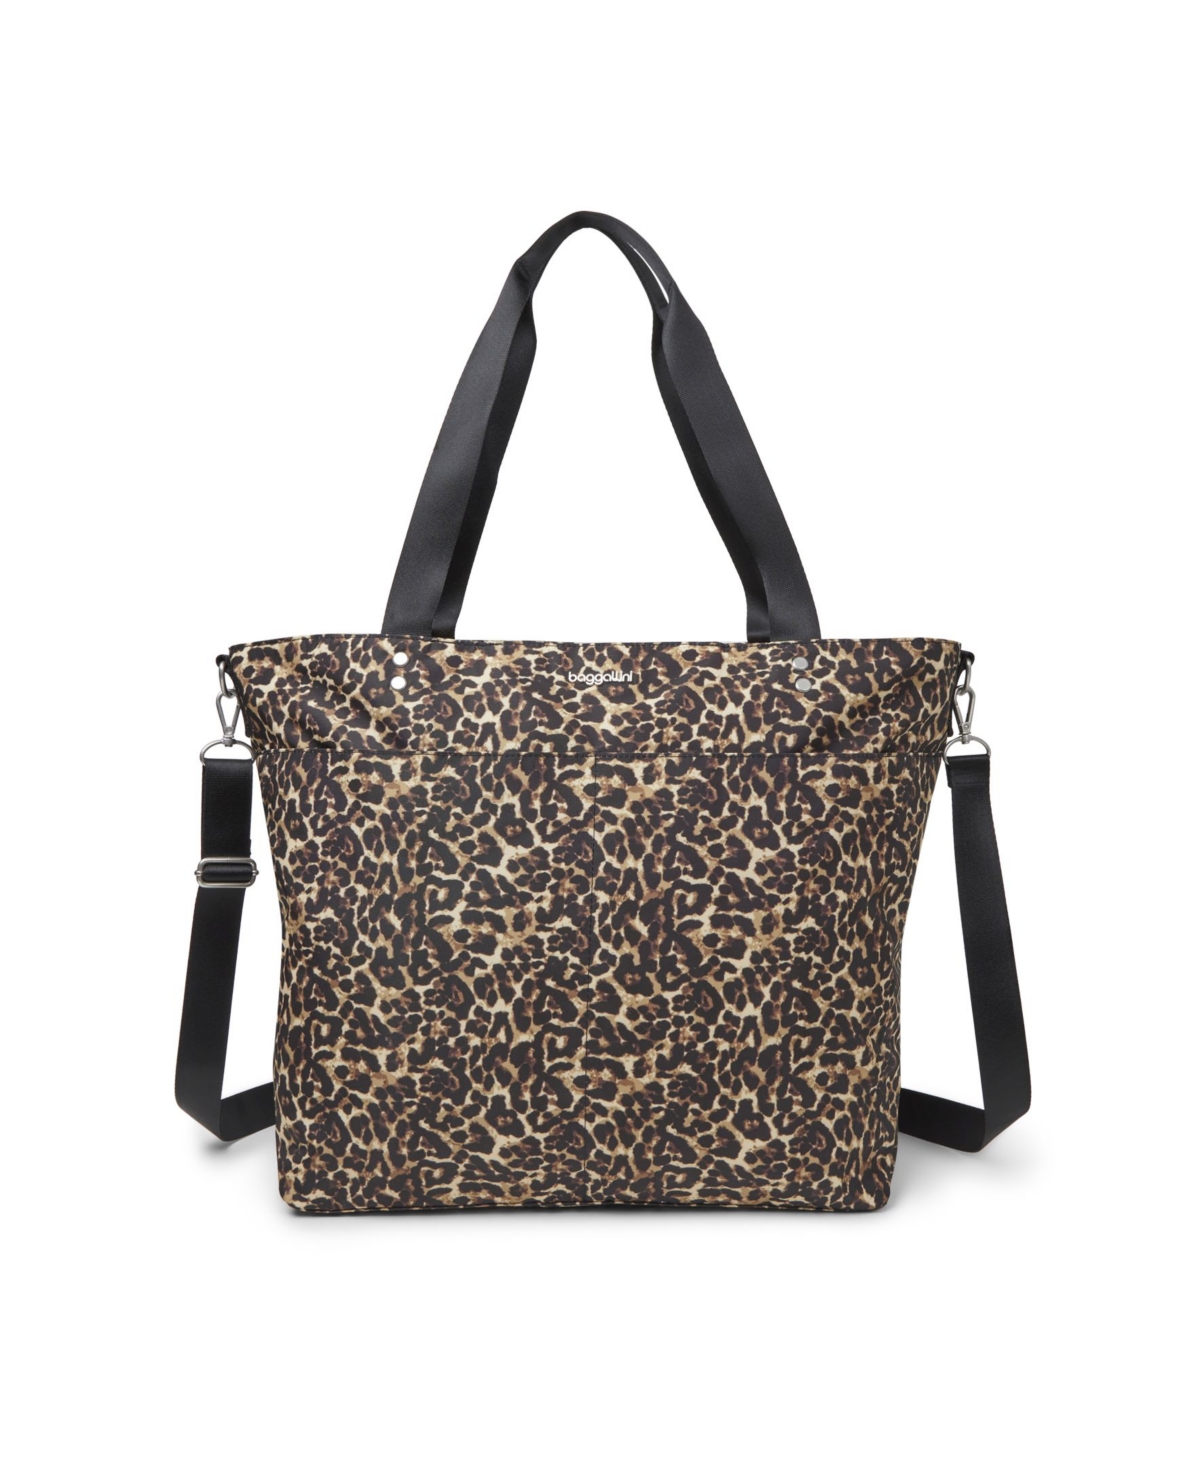 Baggallini Large Carryall Tote In Wild Cheetah - Polyester